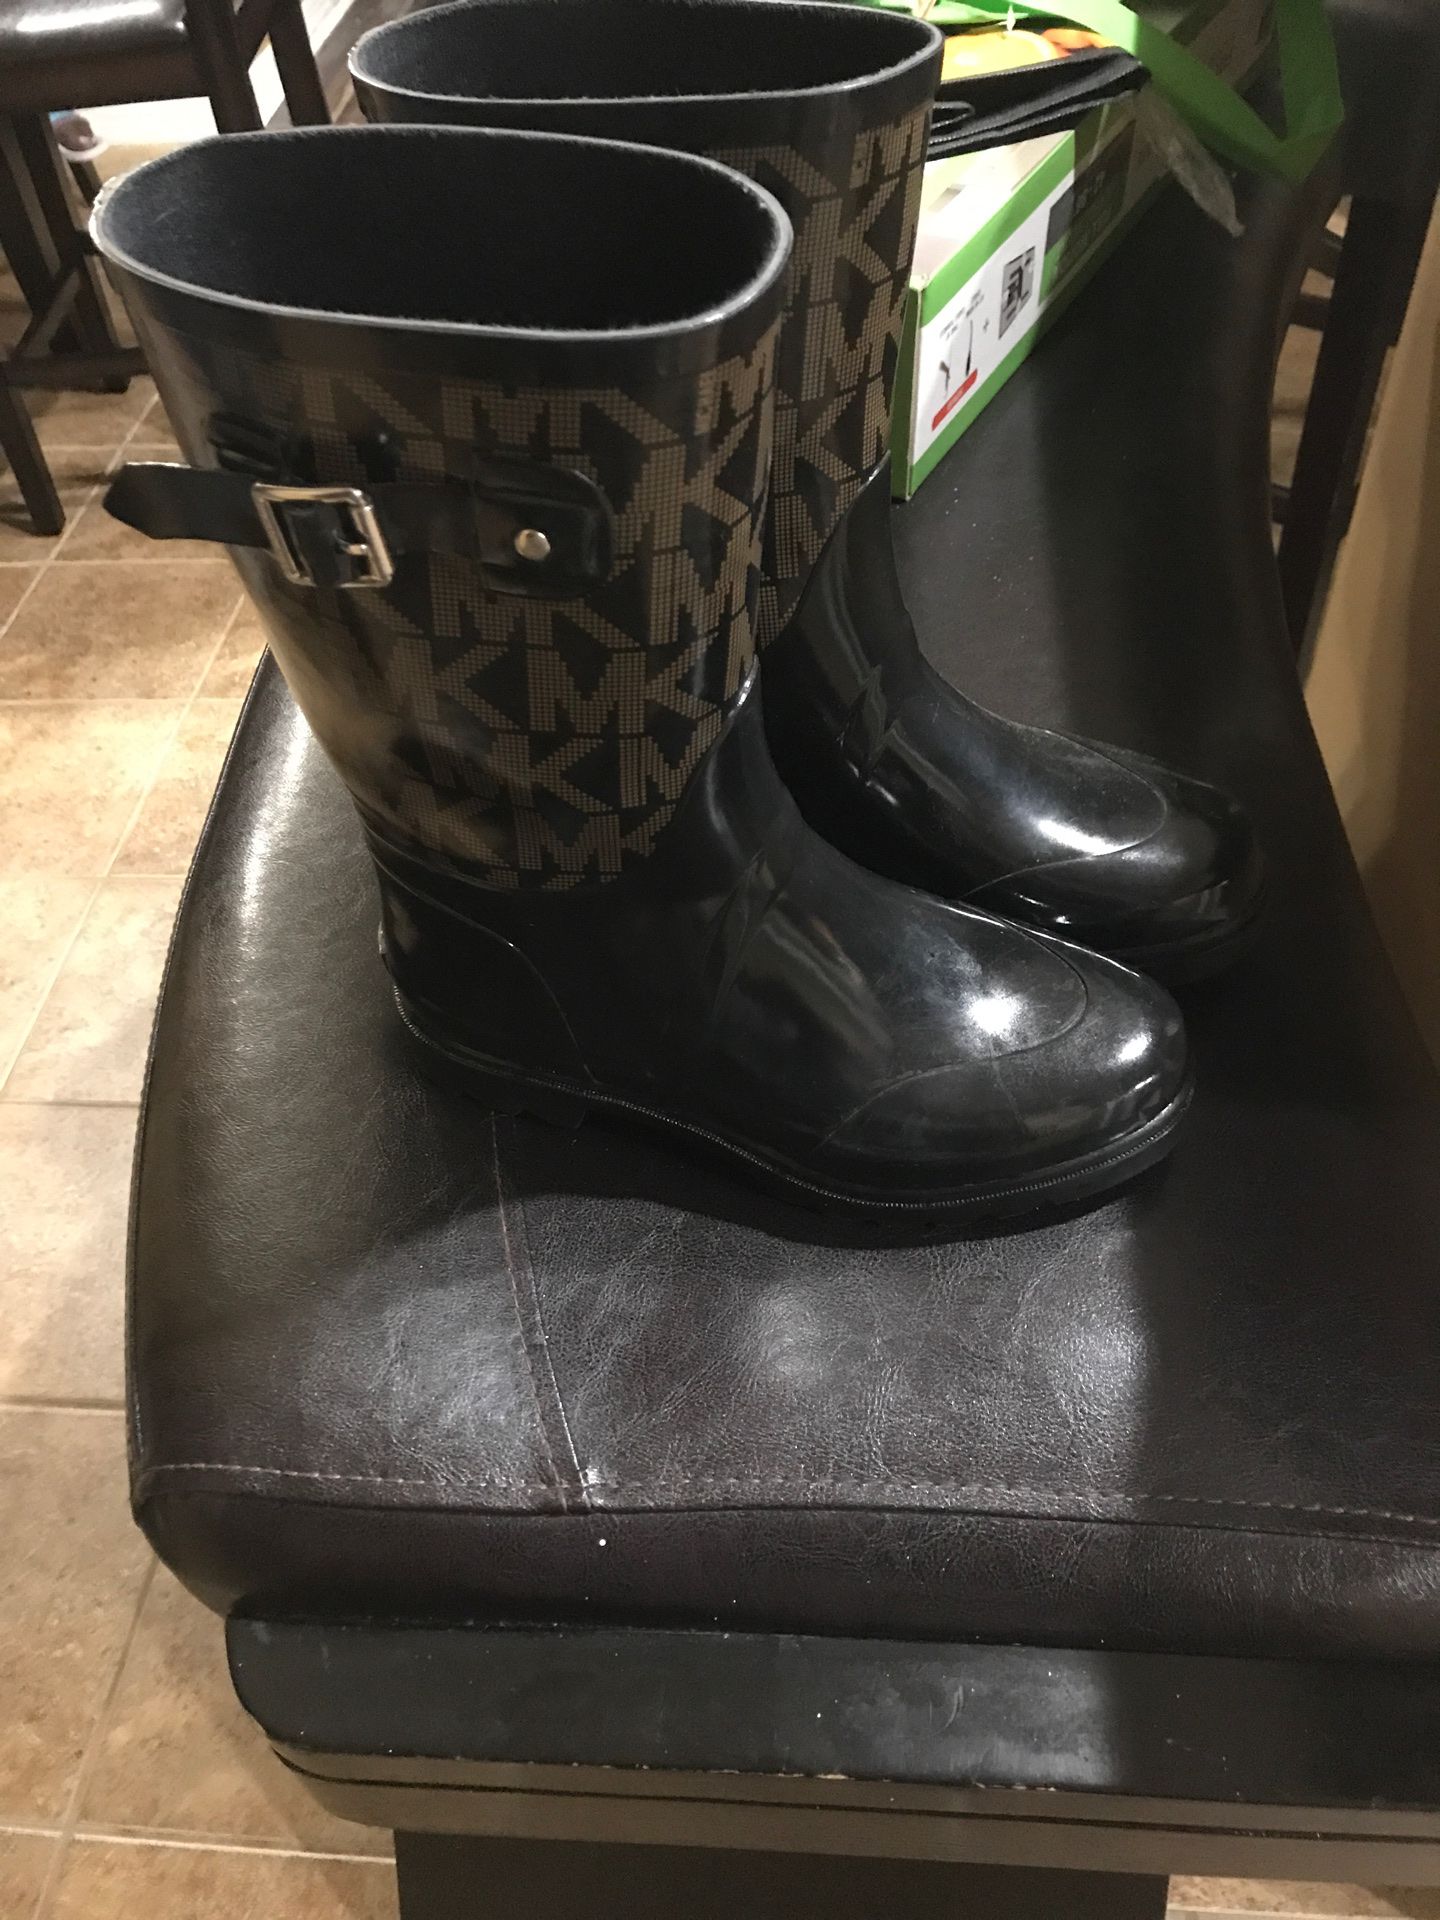 Michael kors Rain boots/Serious inquirys Only‼️